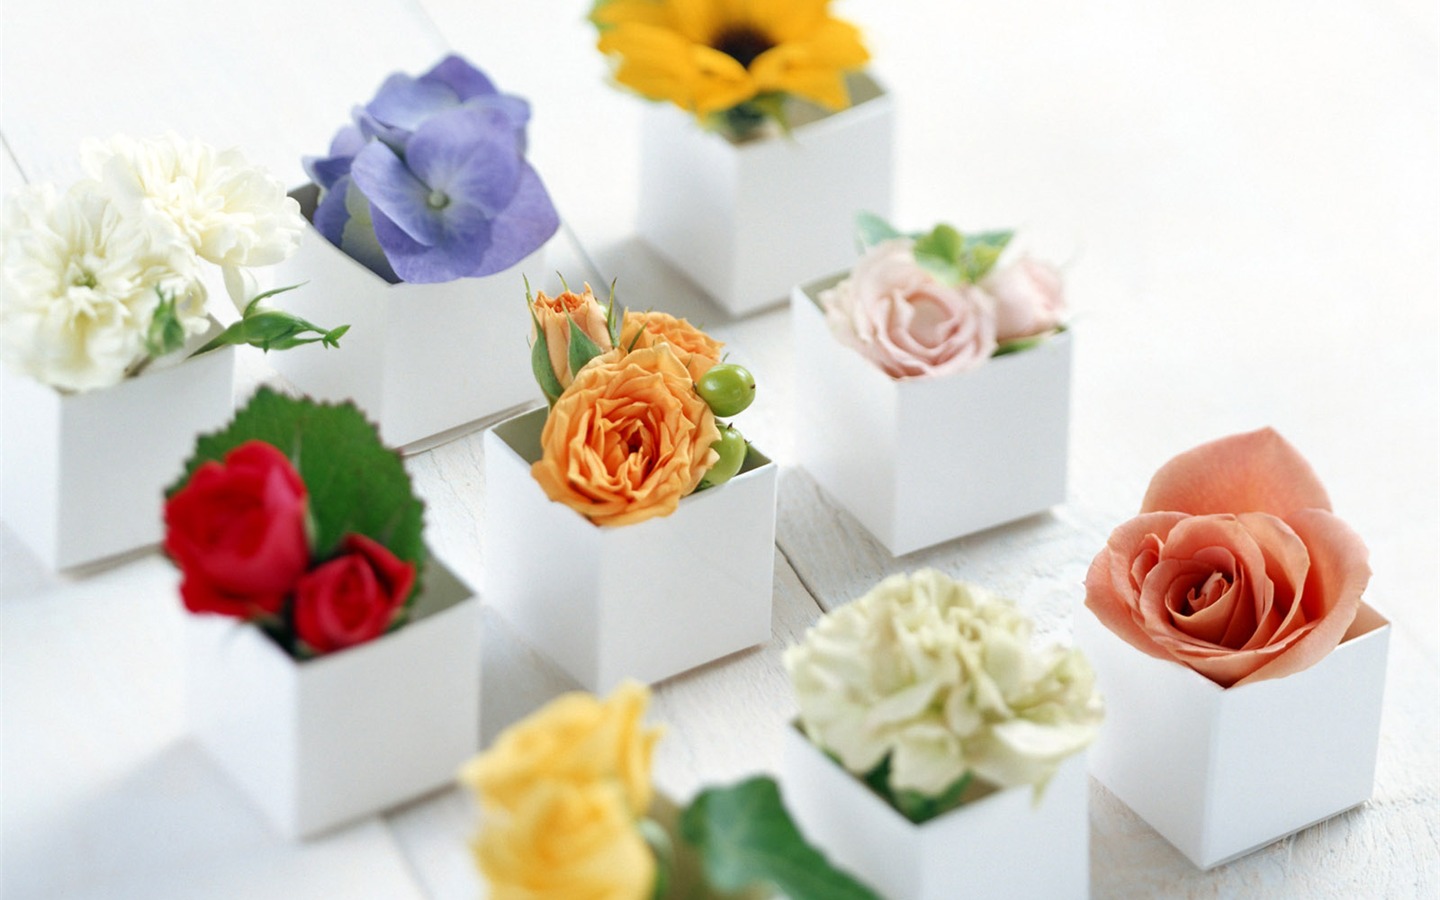 Flowers and gifts wallpaper (1) #2 - 1440x900